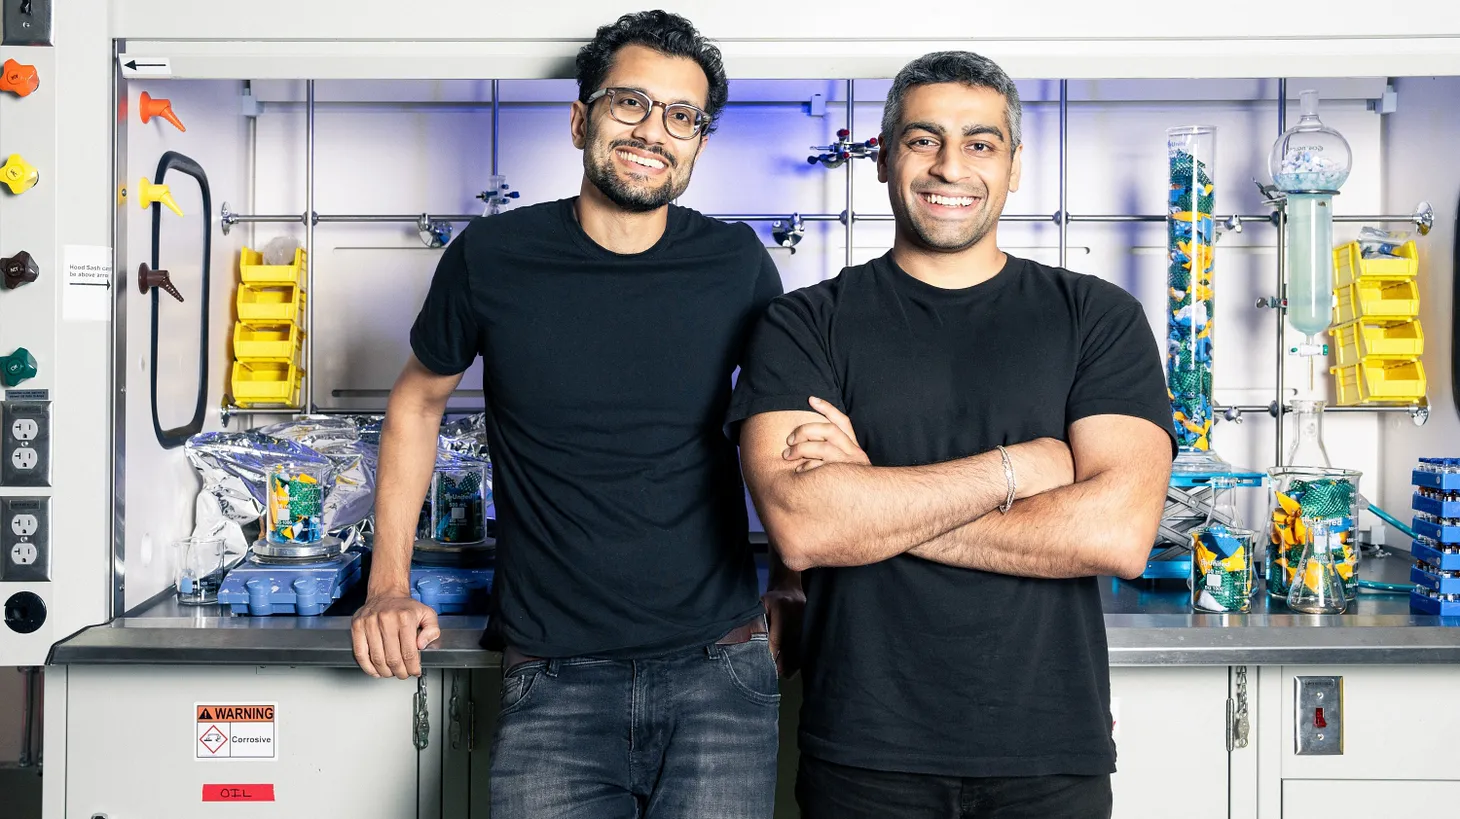 Moby Ahmed (left) and Shay Sethi (right) are working to turn their technique for recycling polyester into a viable business that reduces waste.